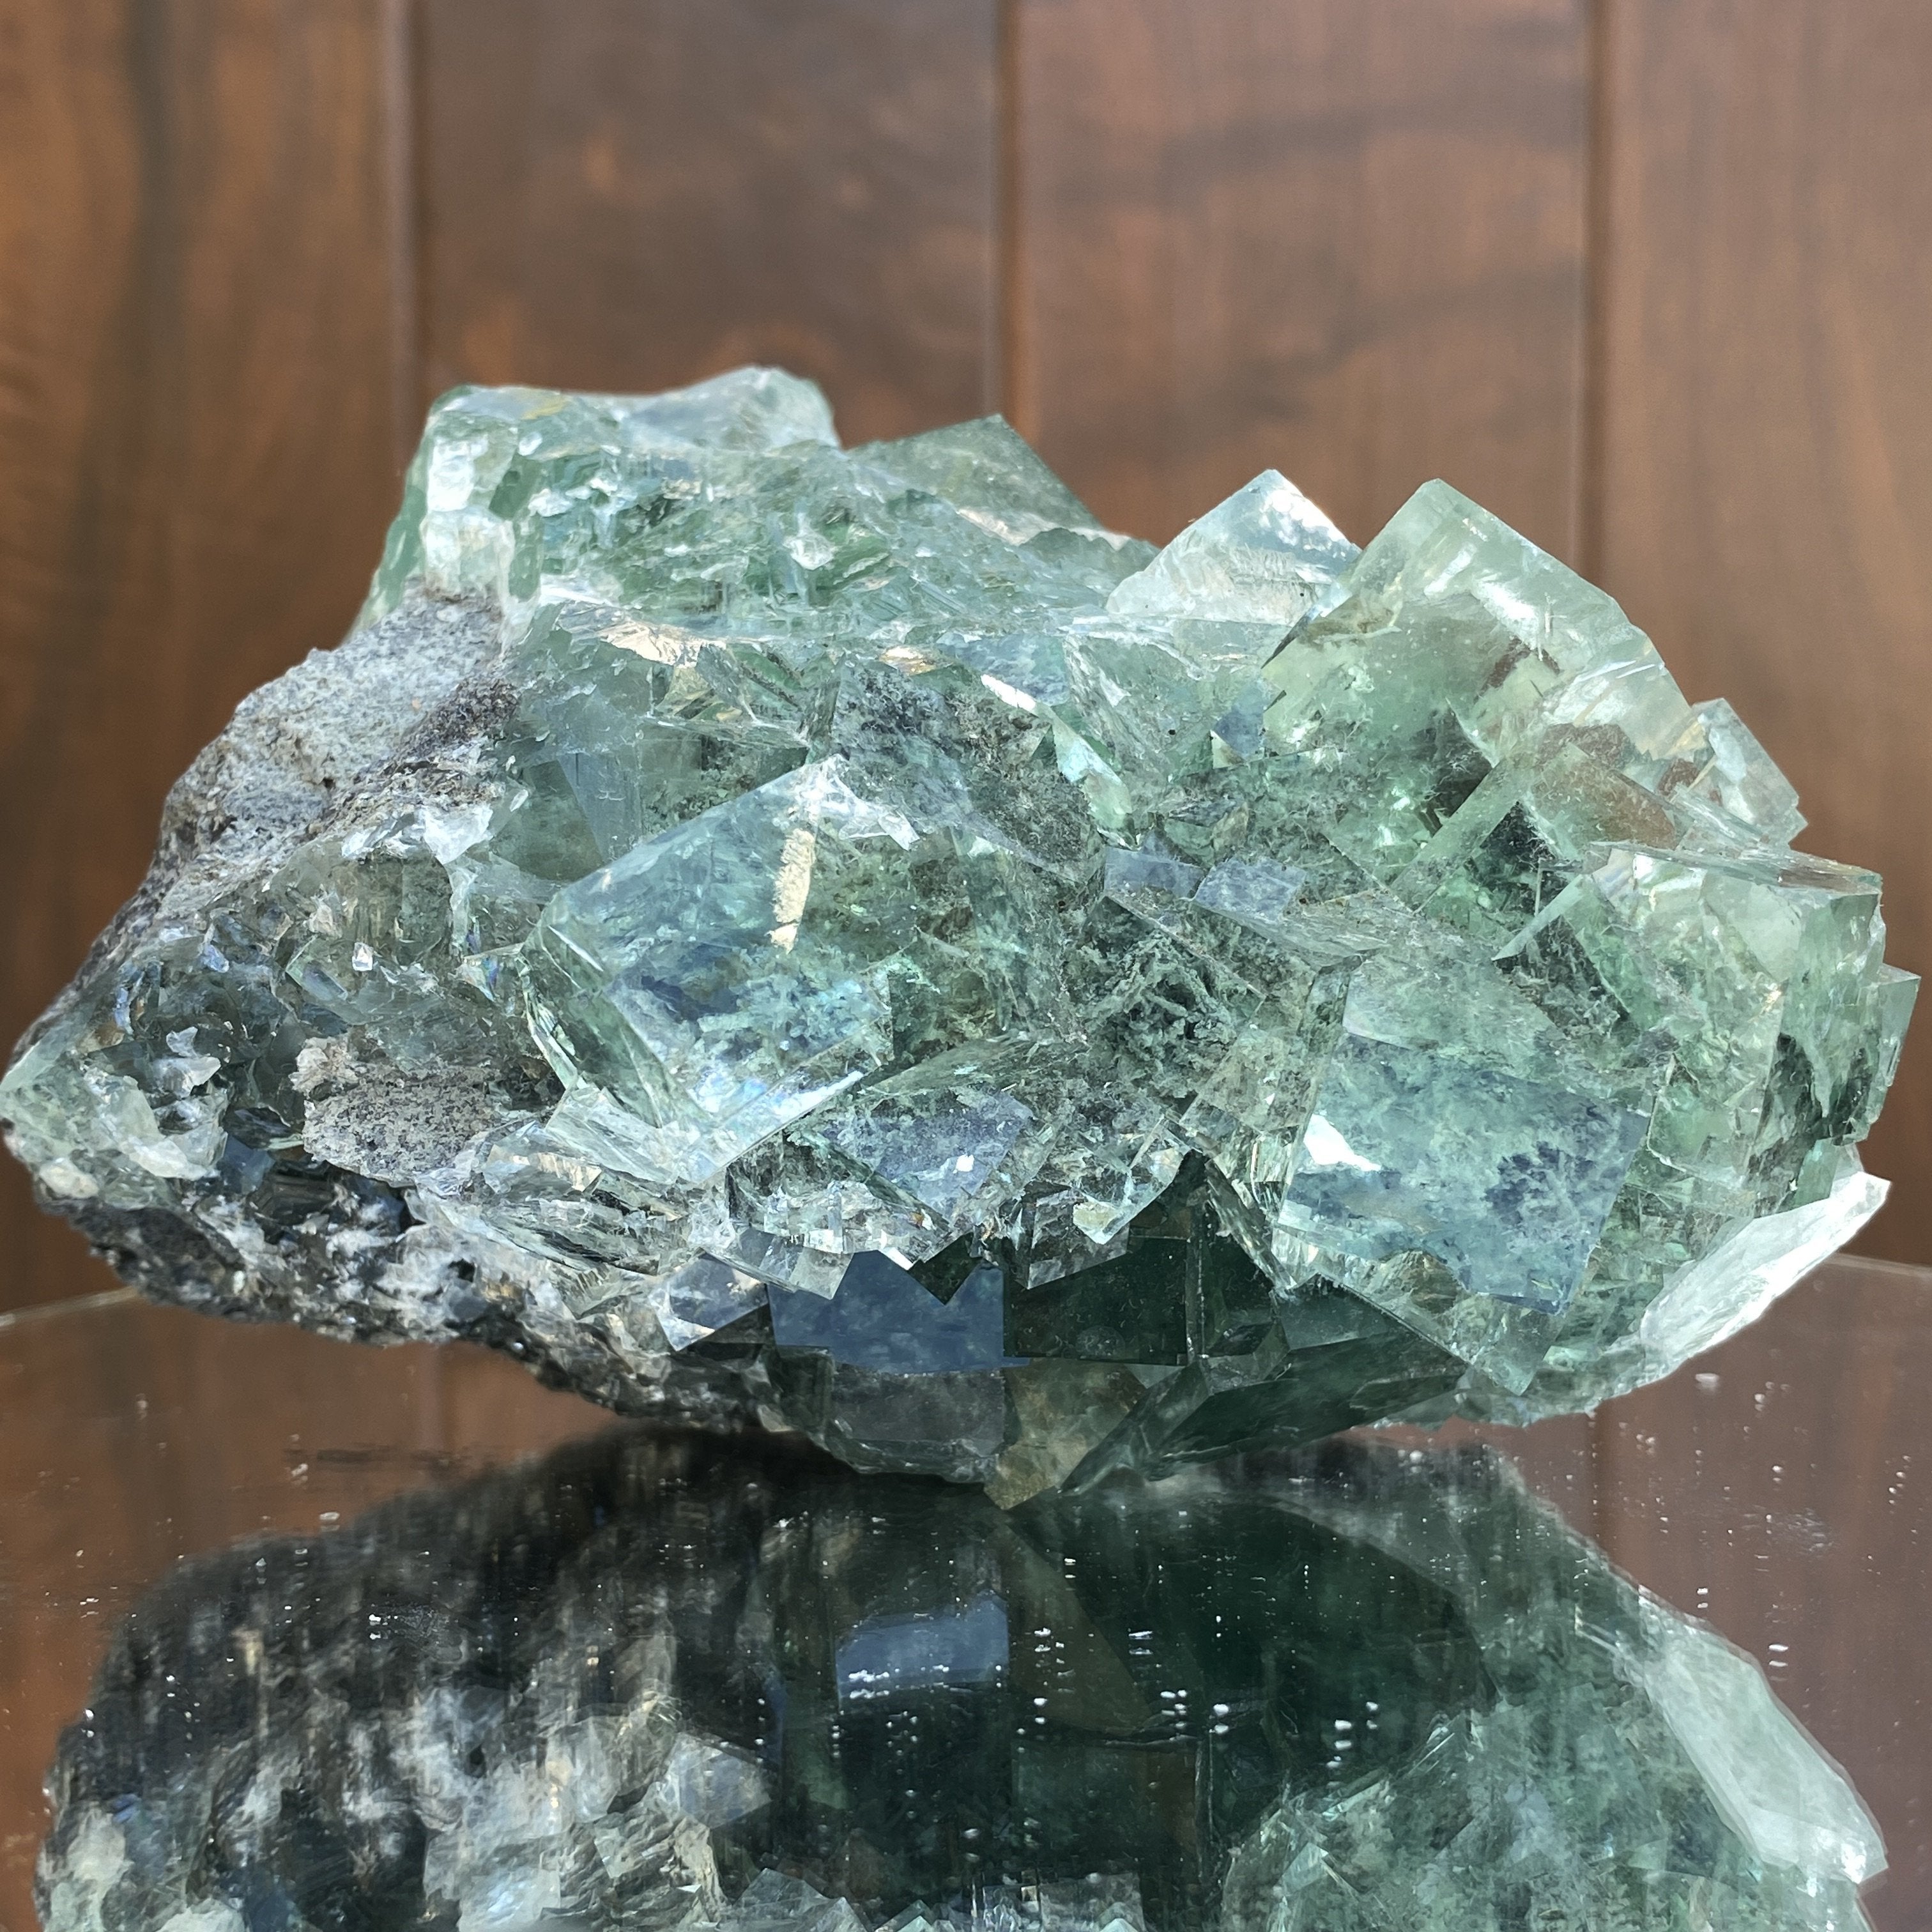 1.12kg 13x9x9cm Glass Green Clear Transparent Fluorite from China - Locco Decor